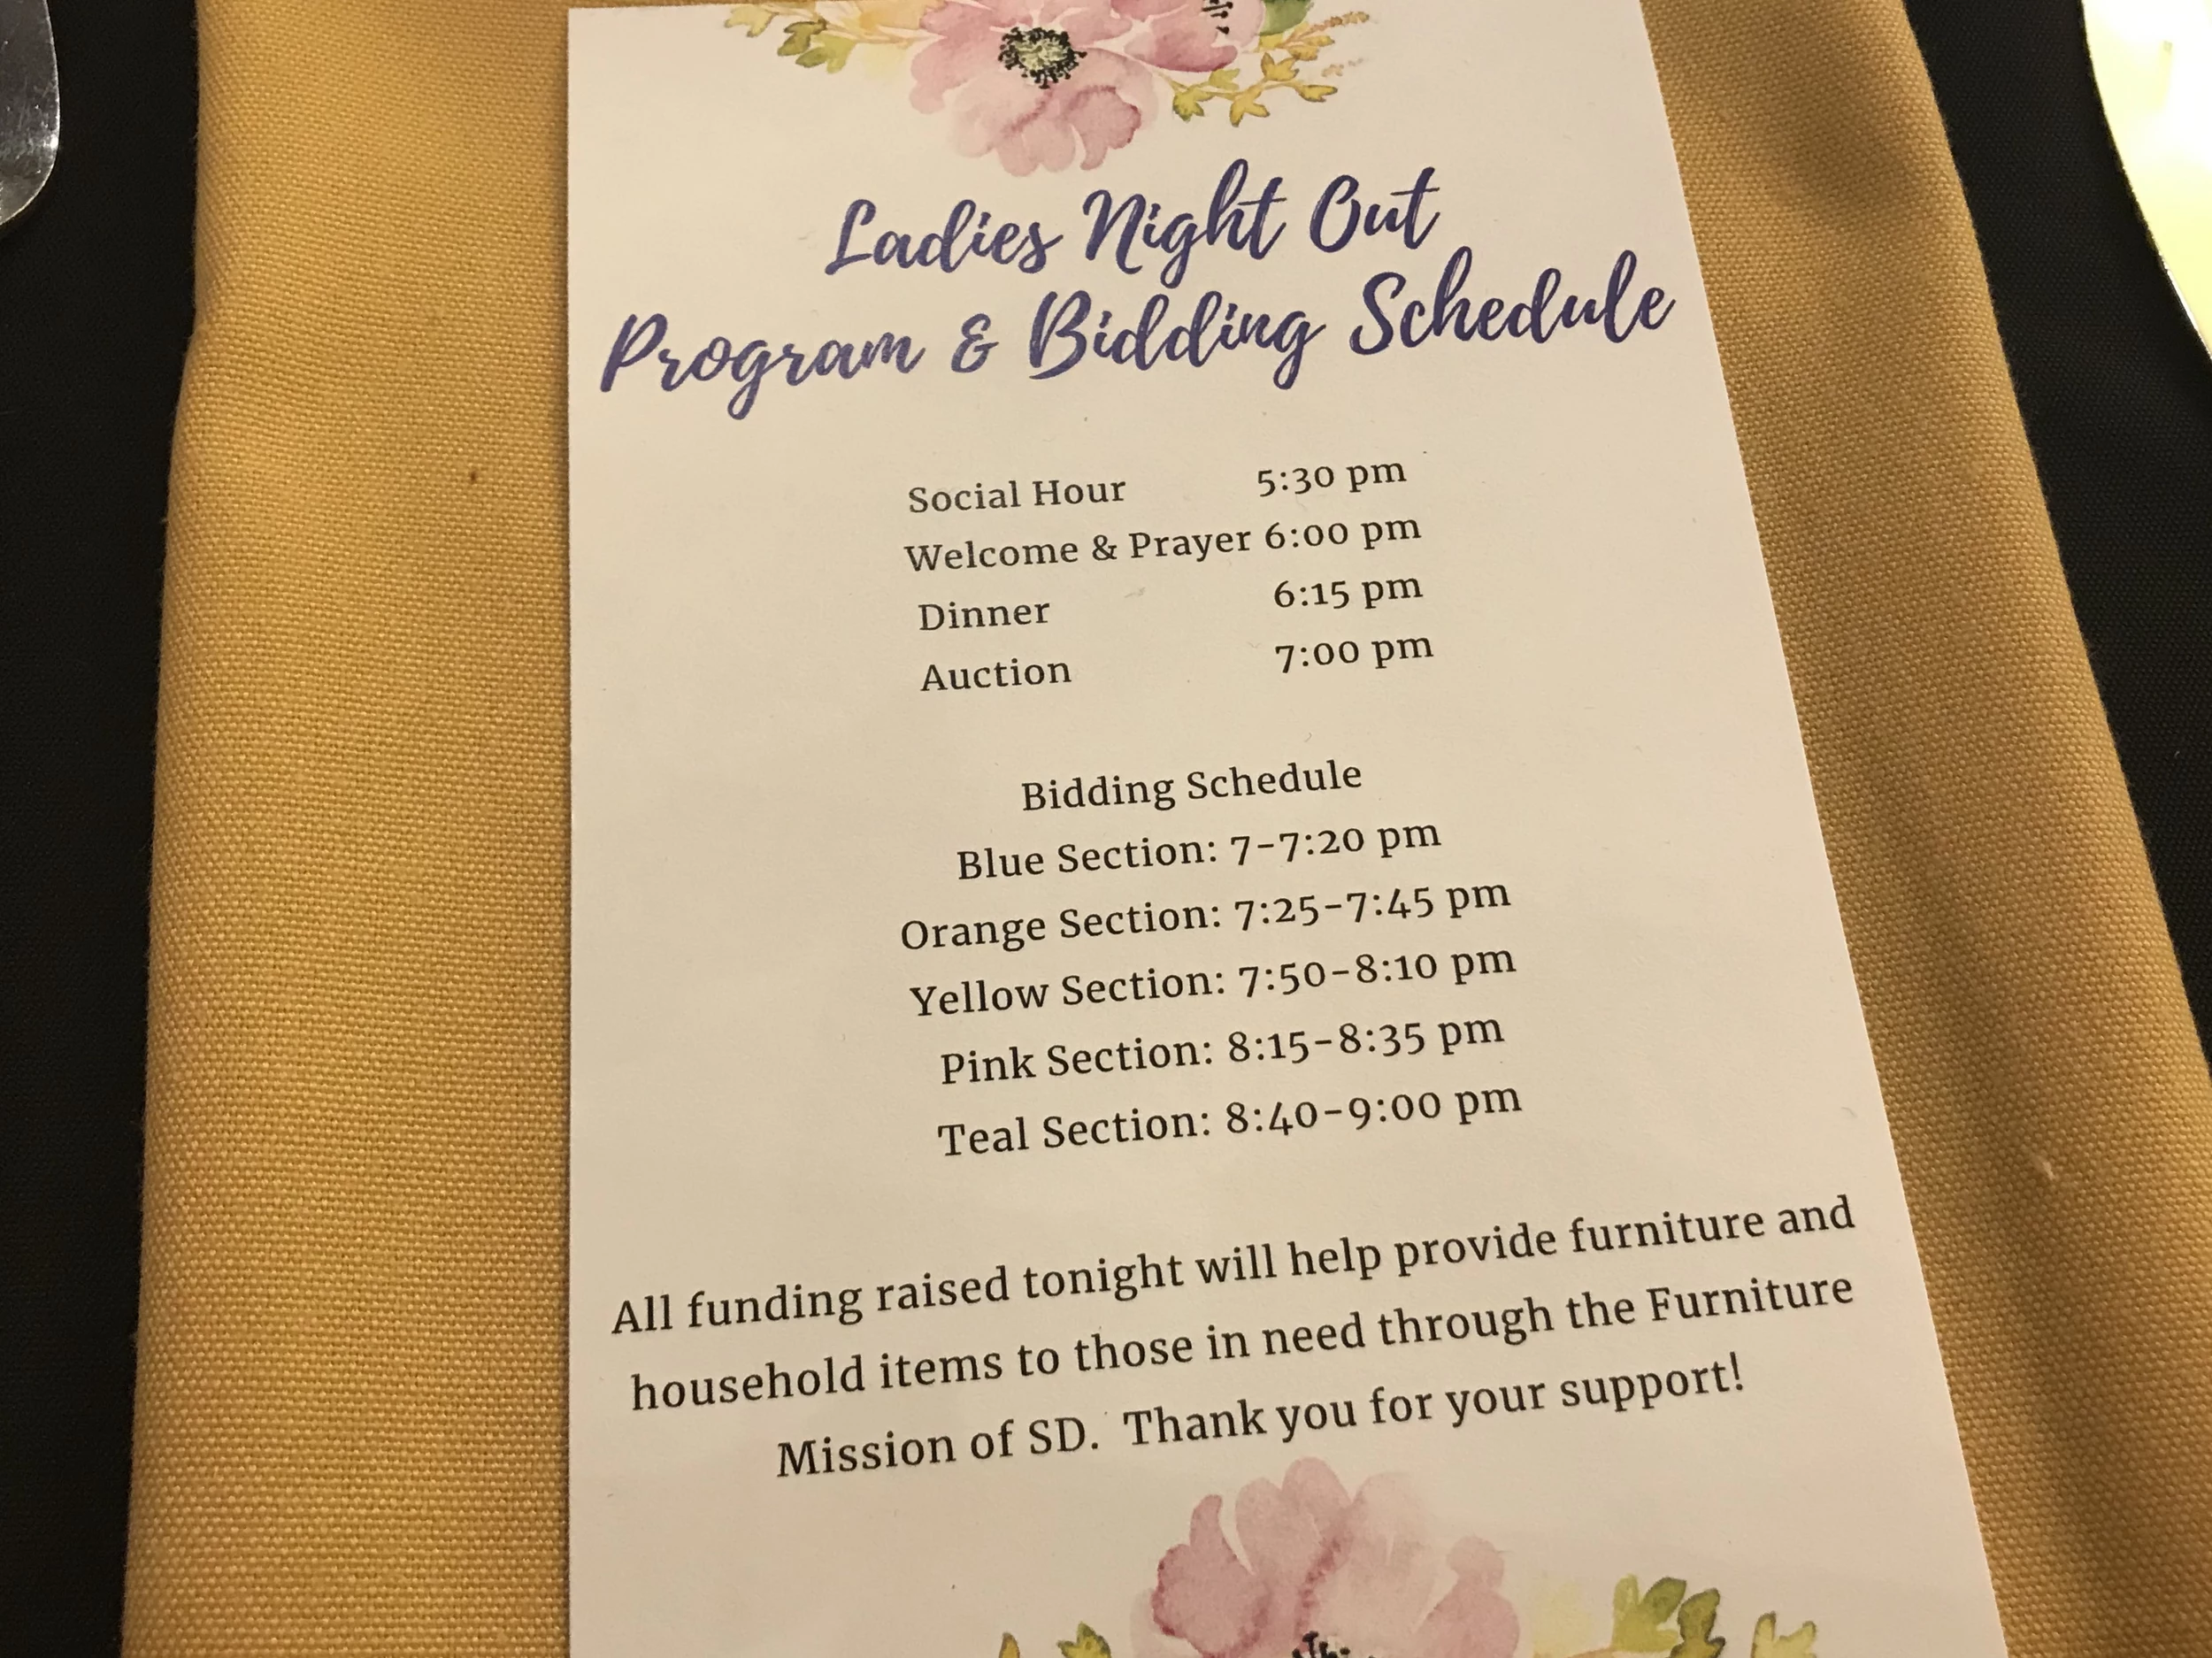 Ladies Night Out Event Benefits Furniture Mission Of South Dakota